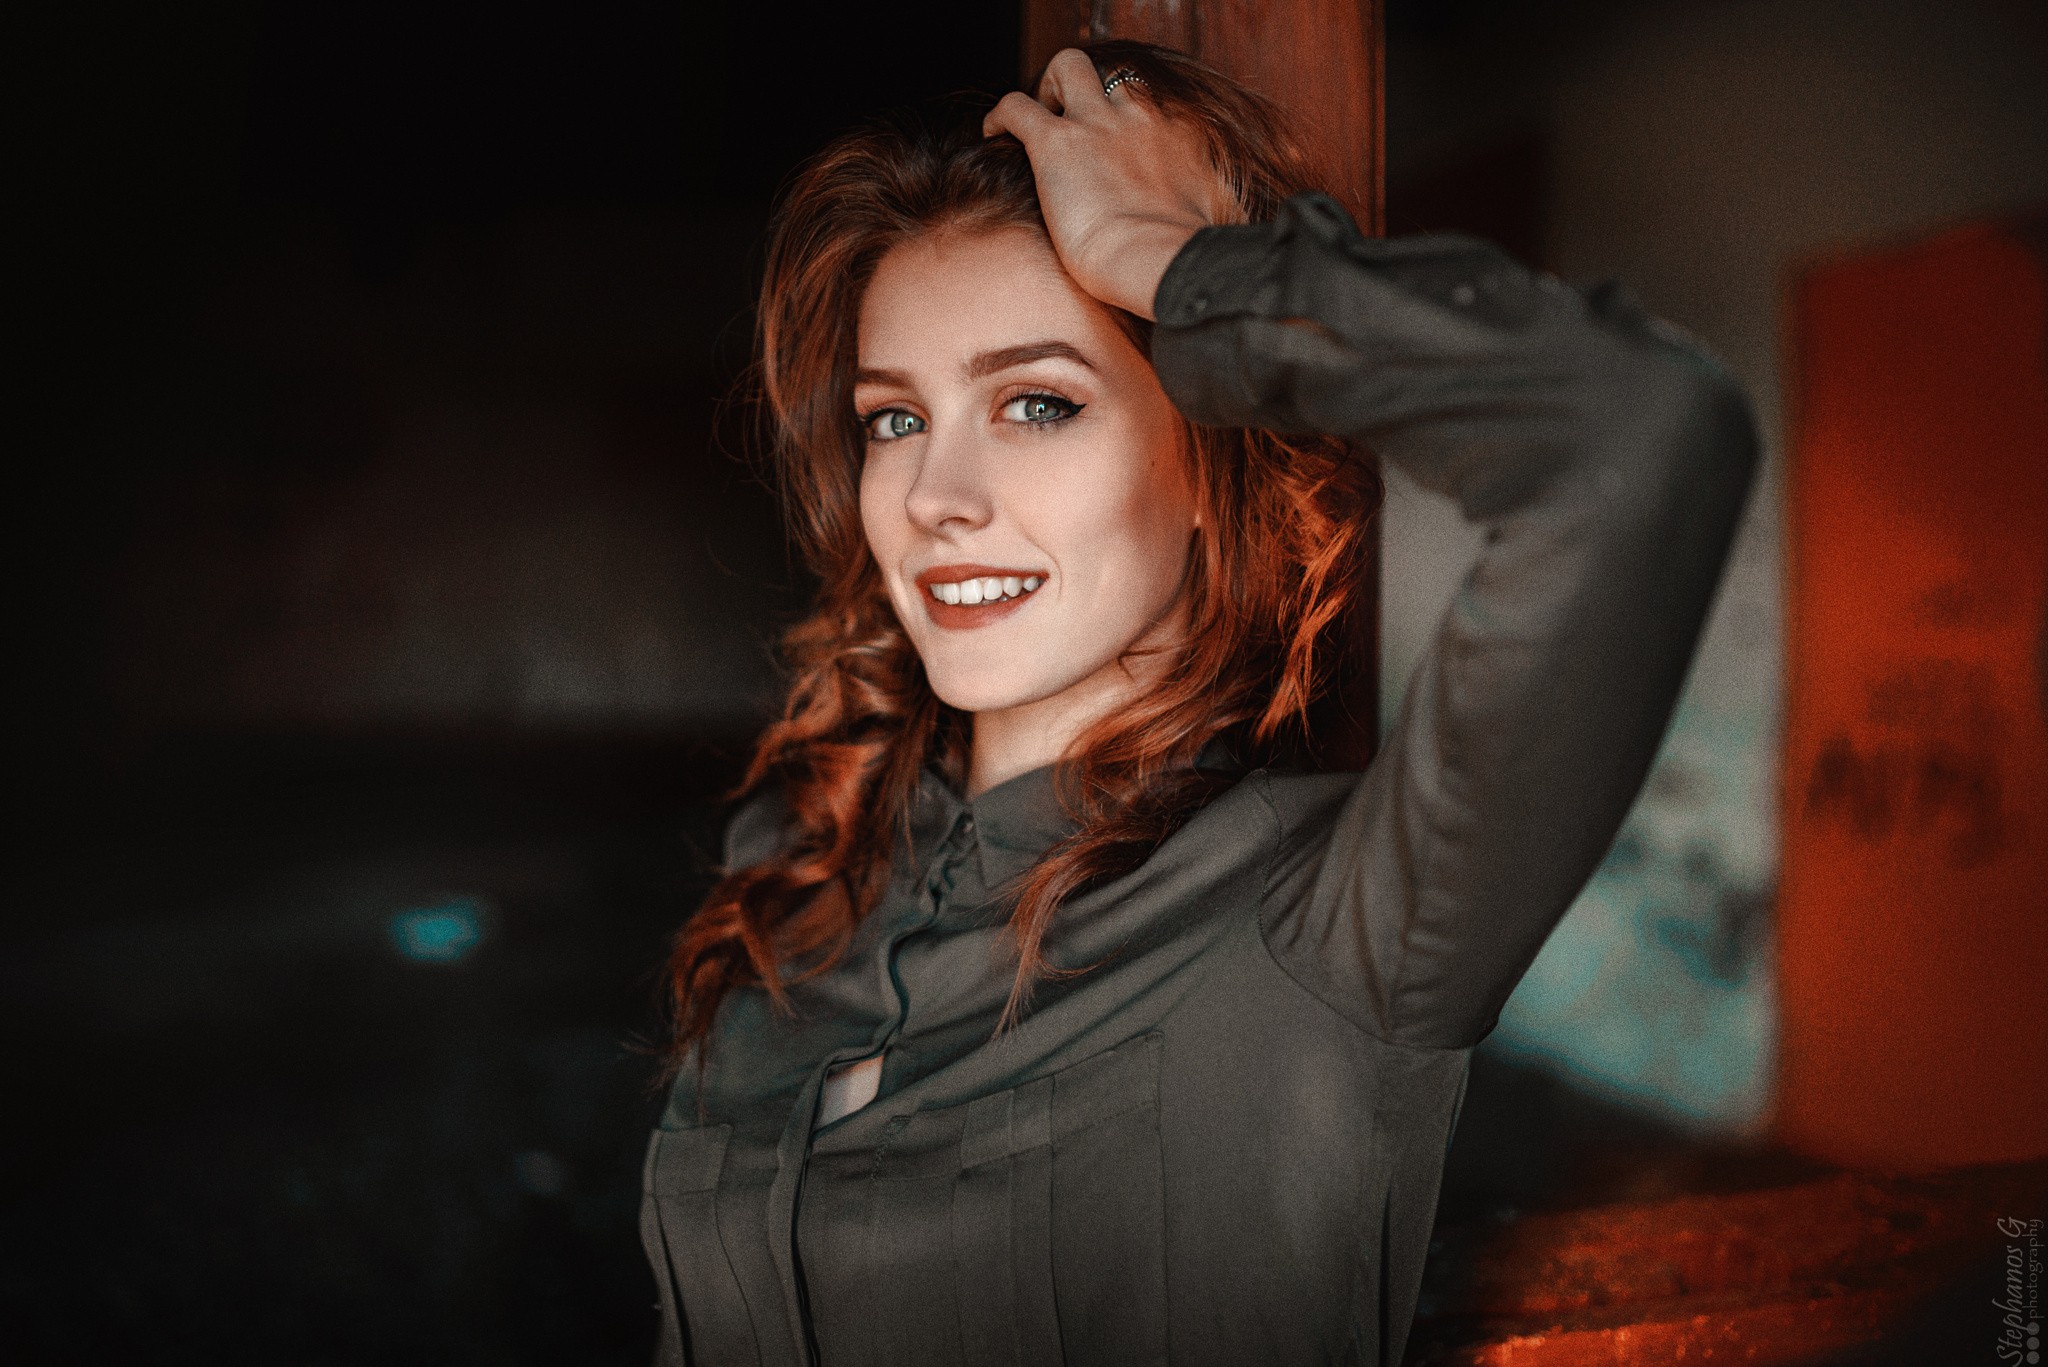 People 2048x1367 women redhead smiling portrait wavy hair warm colors depth of field Stephanos Georgiou face looking at viewer one arm up red lipstick model watermarked